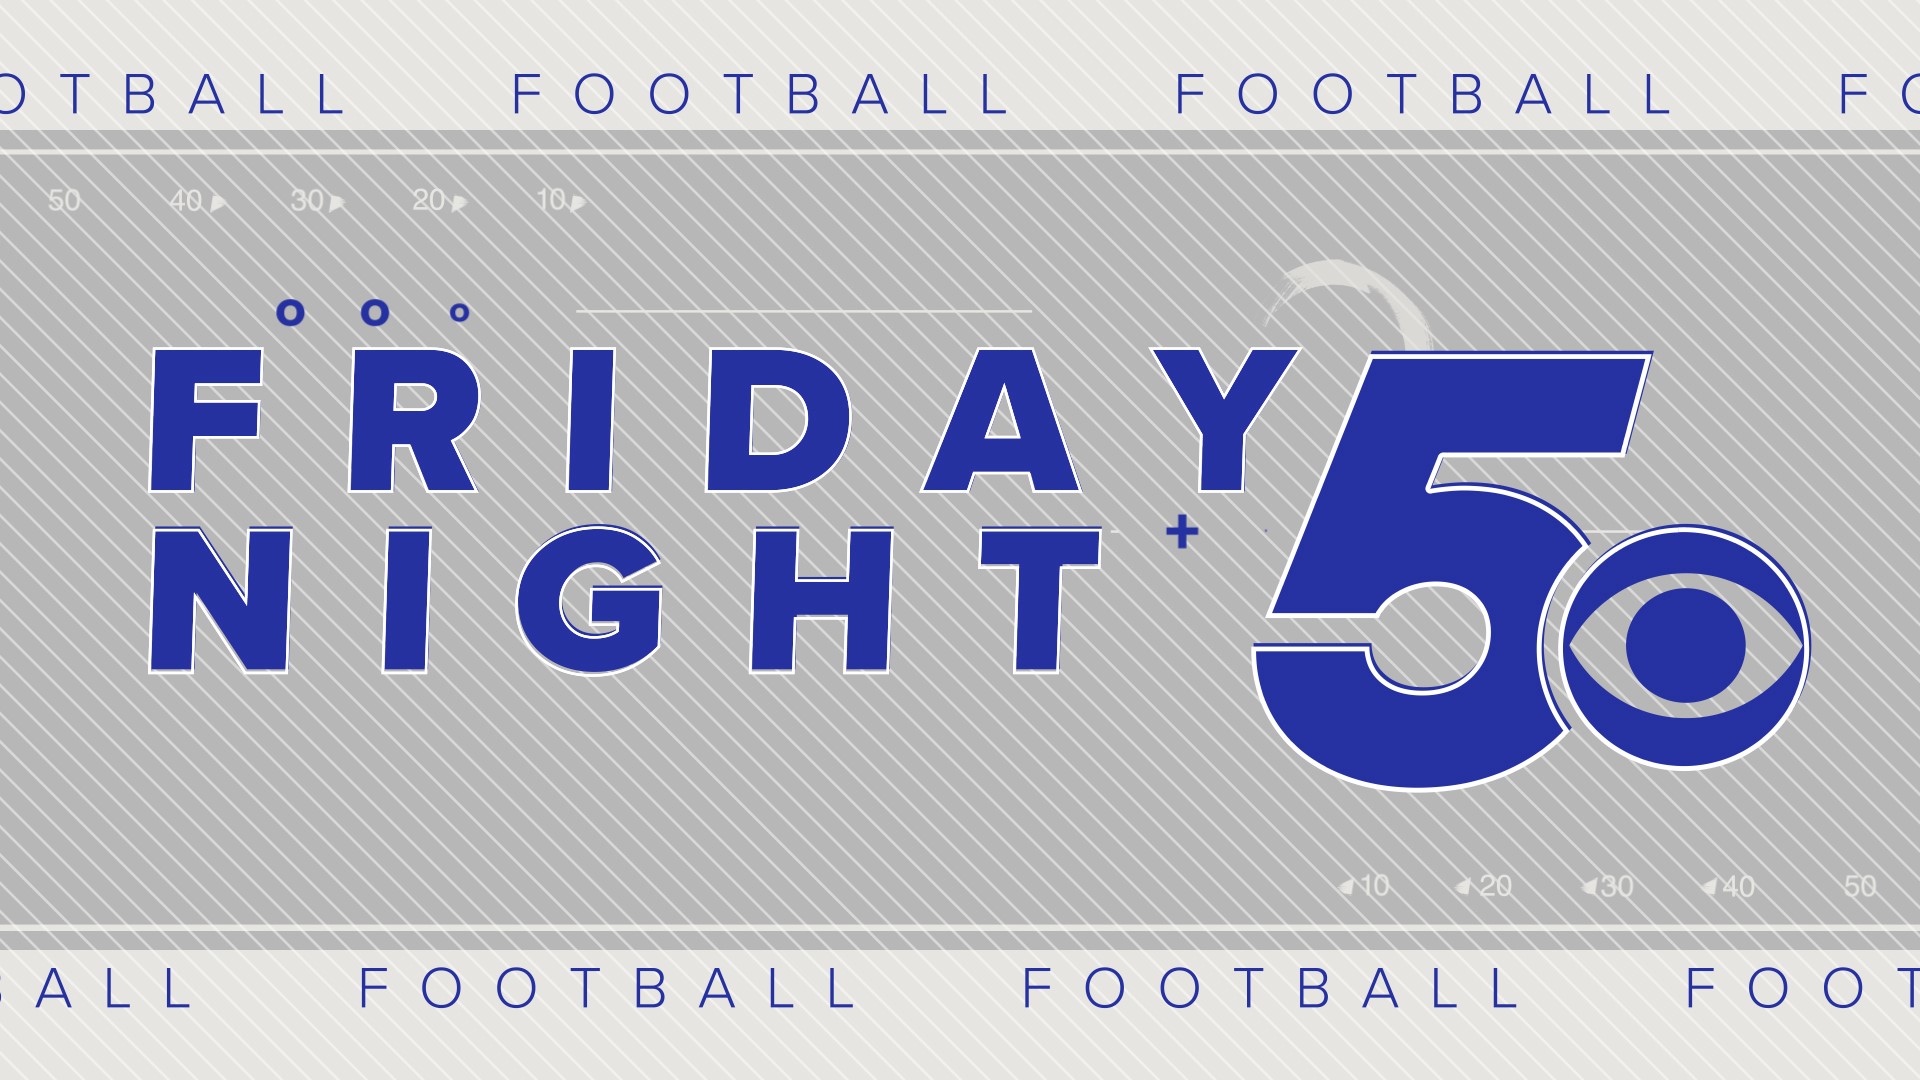 Keep up with the latest high school football action where you live on Channel 5!